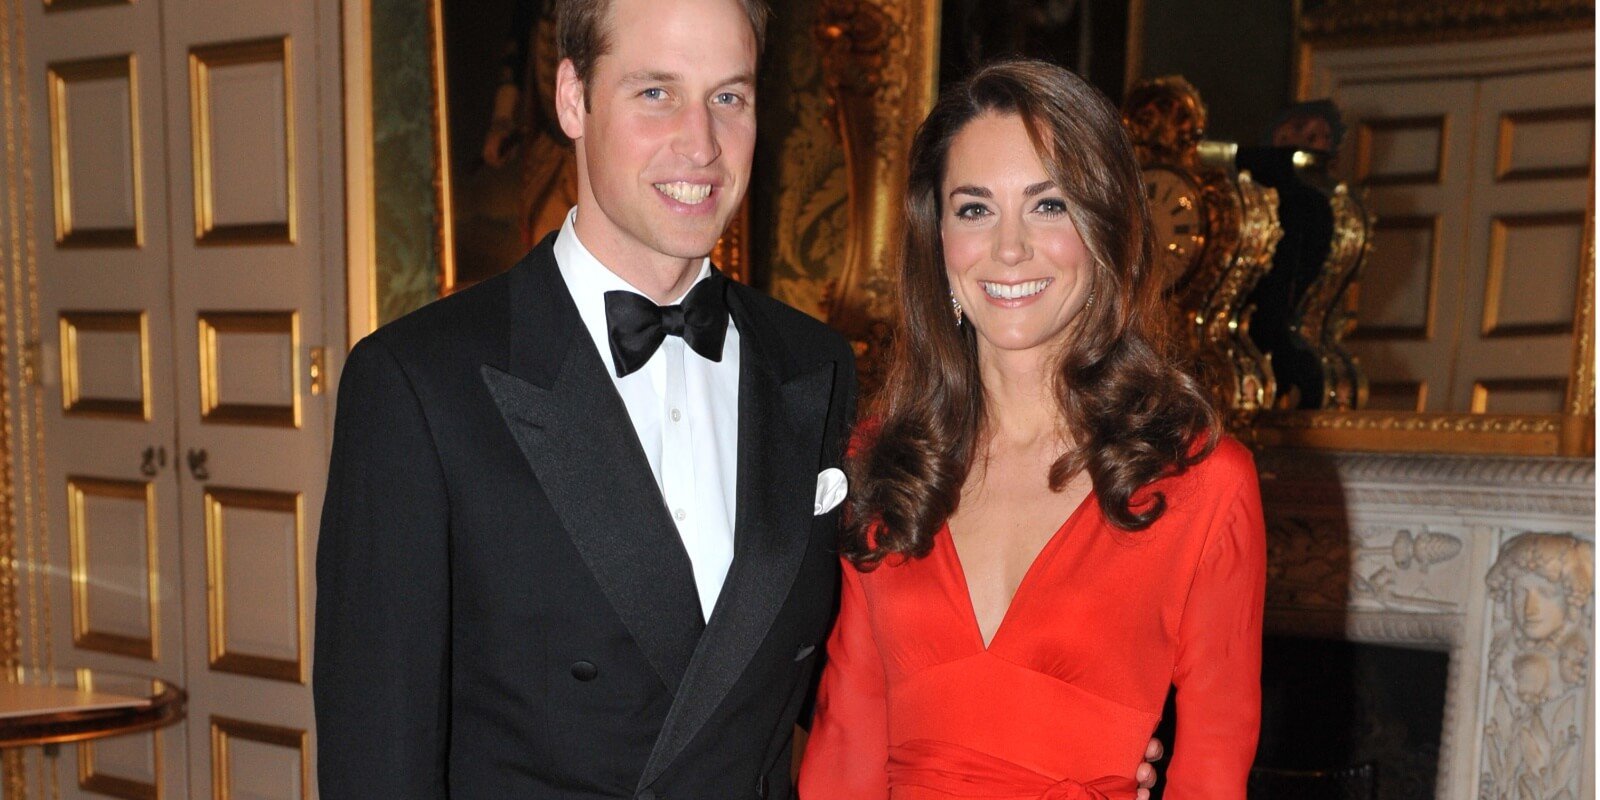 Prince William and Kate Middleton photographed at an event in 2011 where she wore a red, low-cut dress.